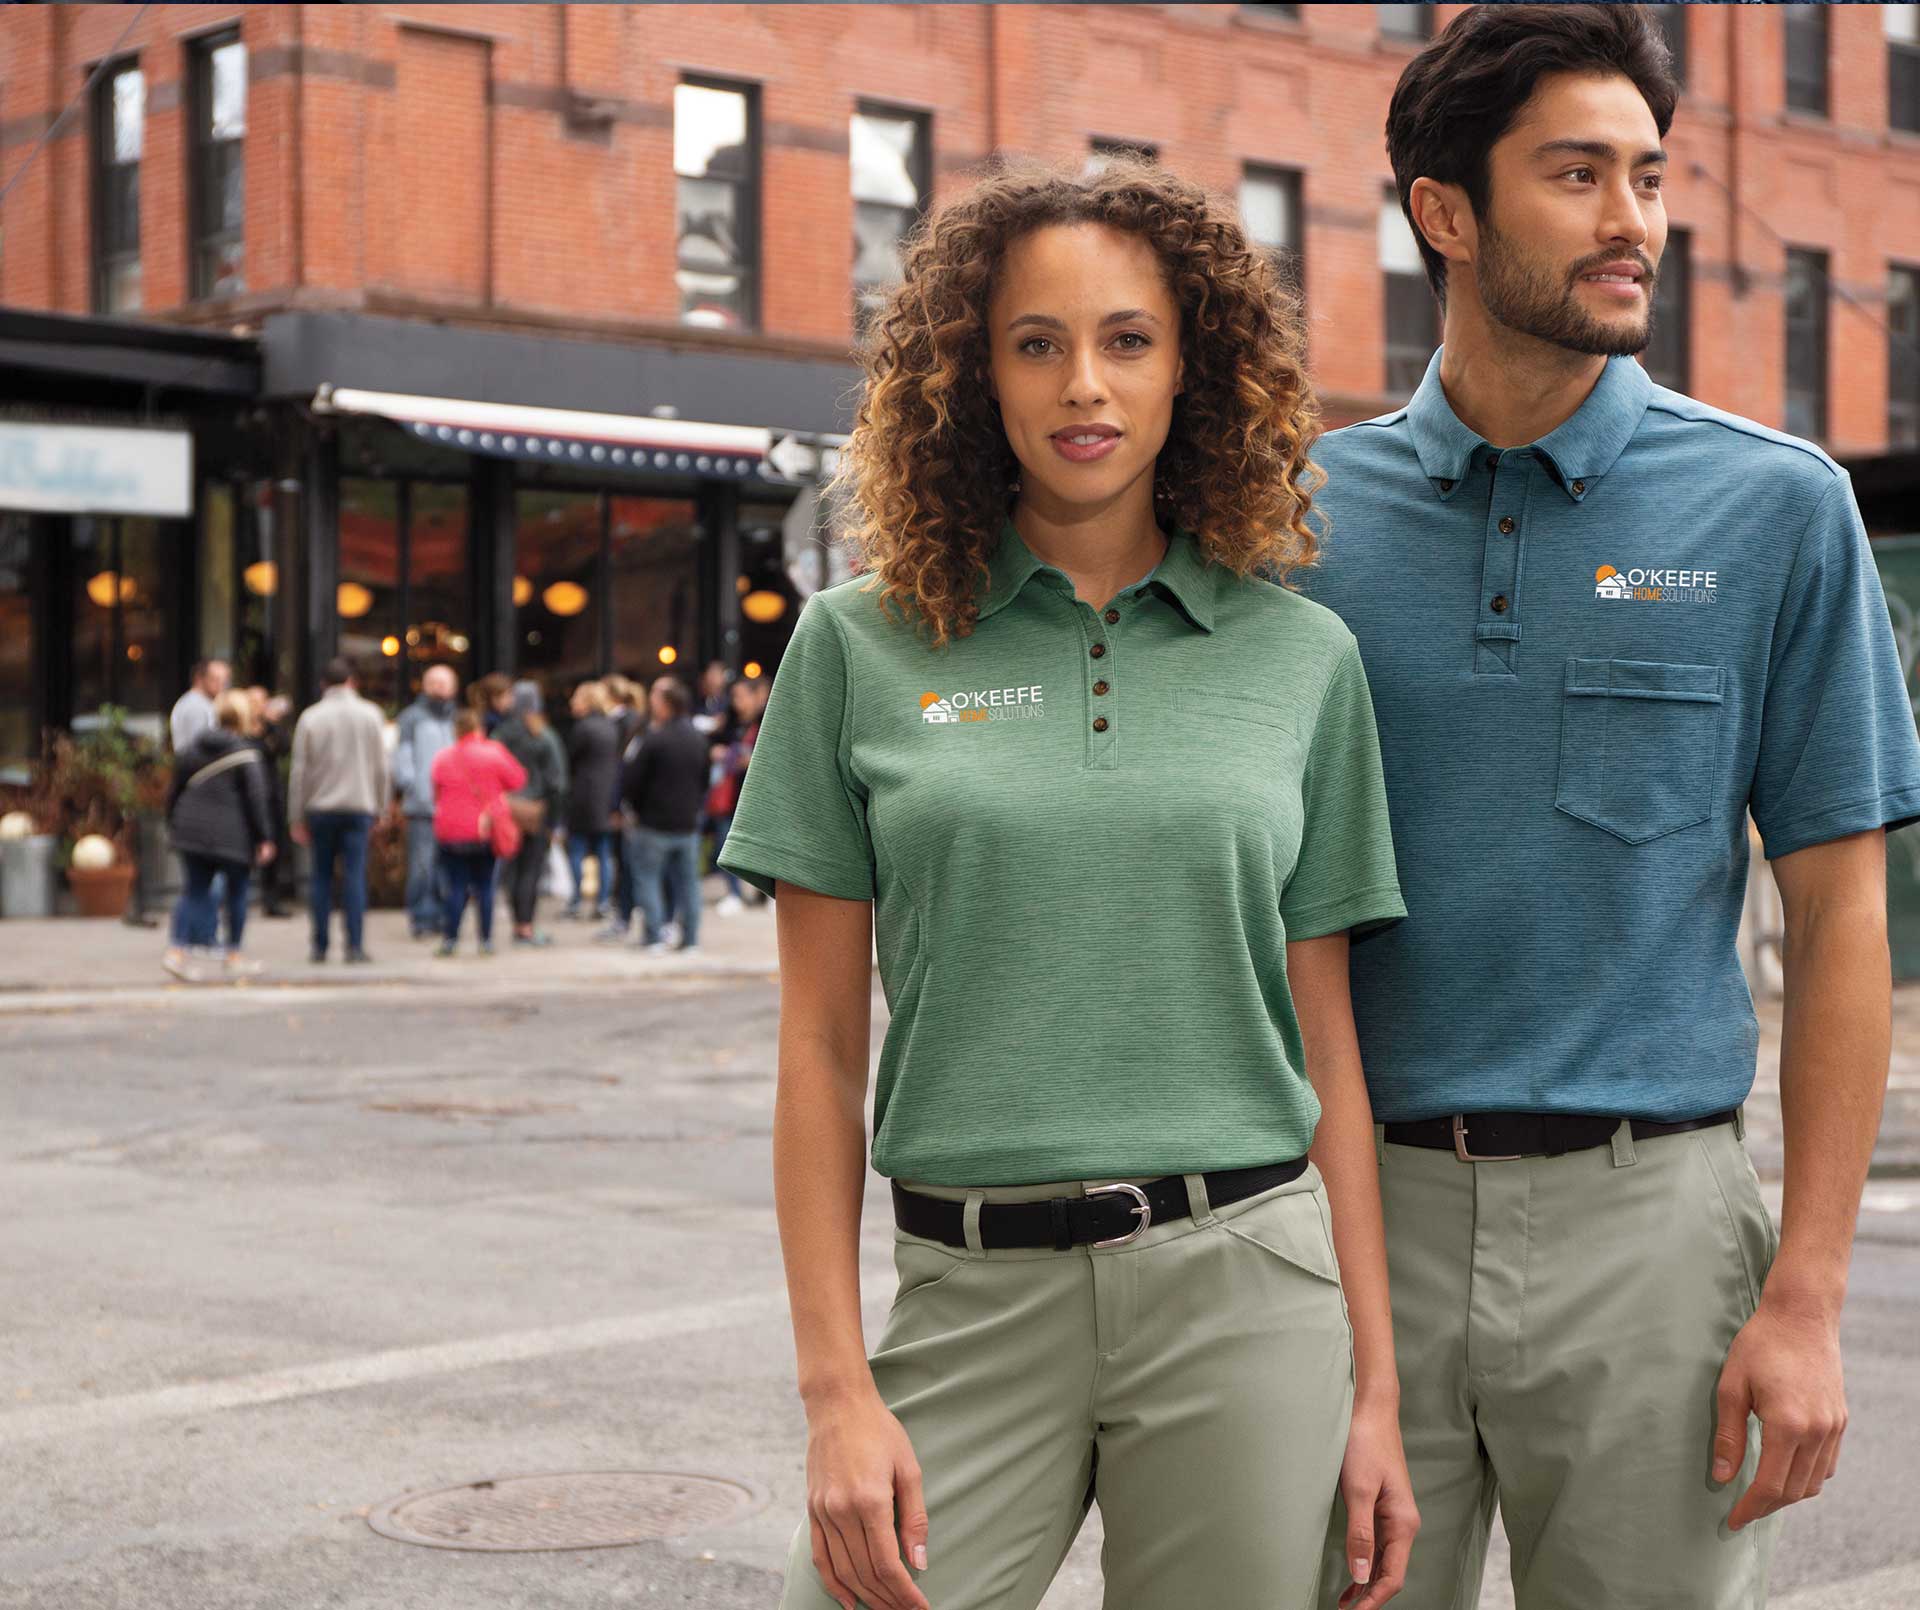 Image of man and woman wearing aramark polo shirts with embroidered logos